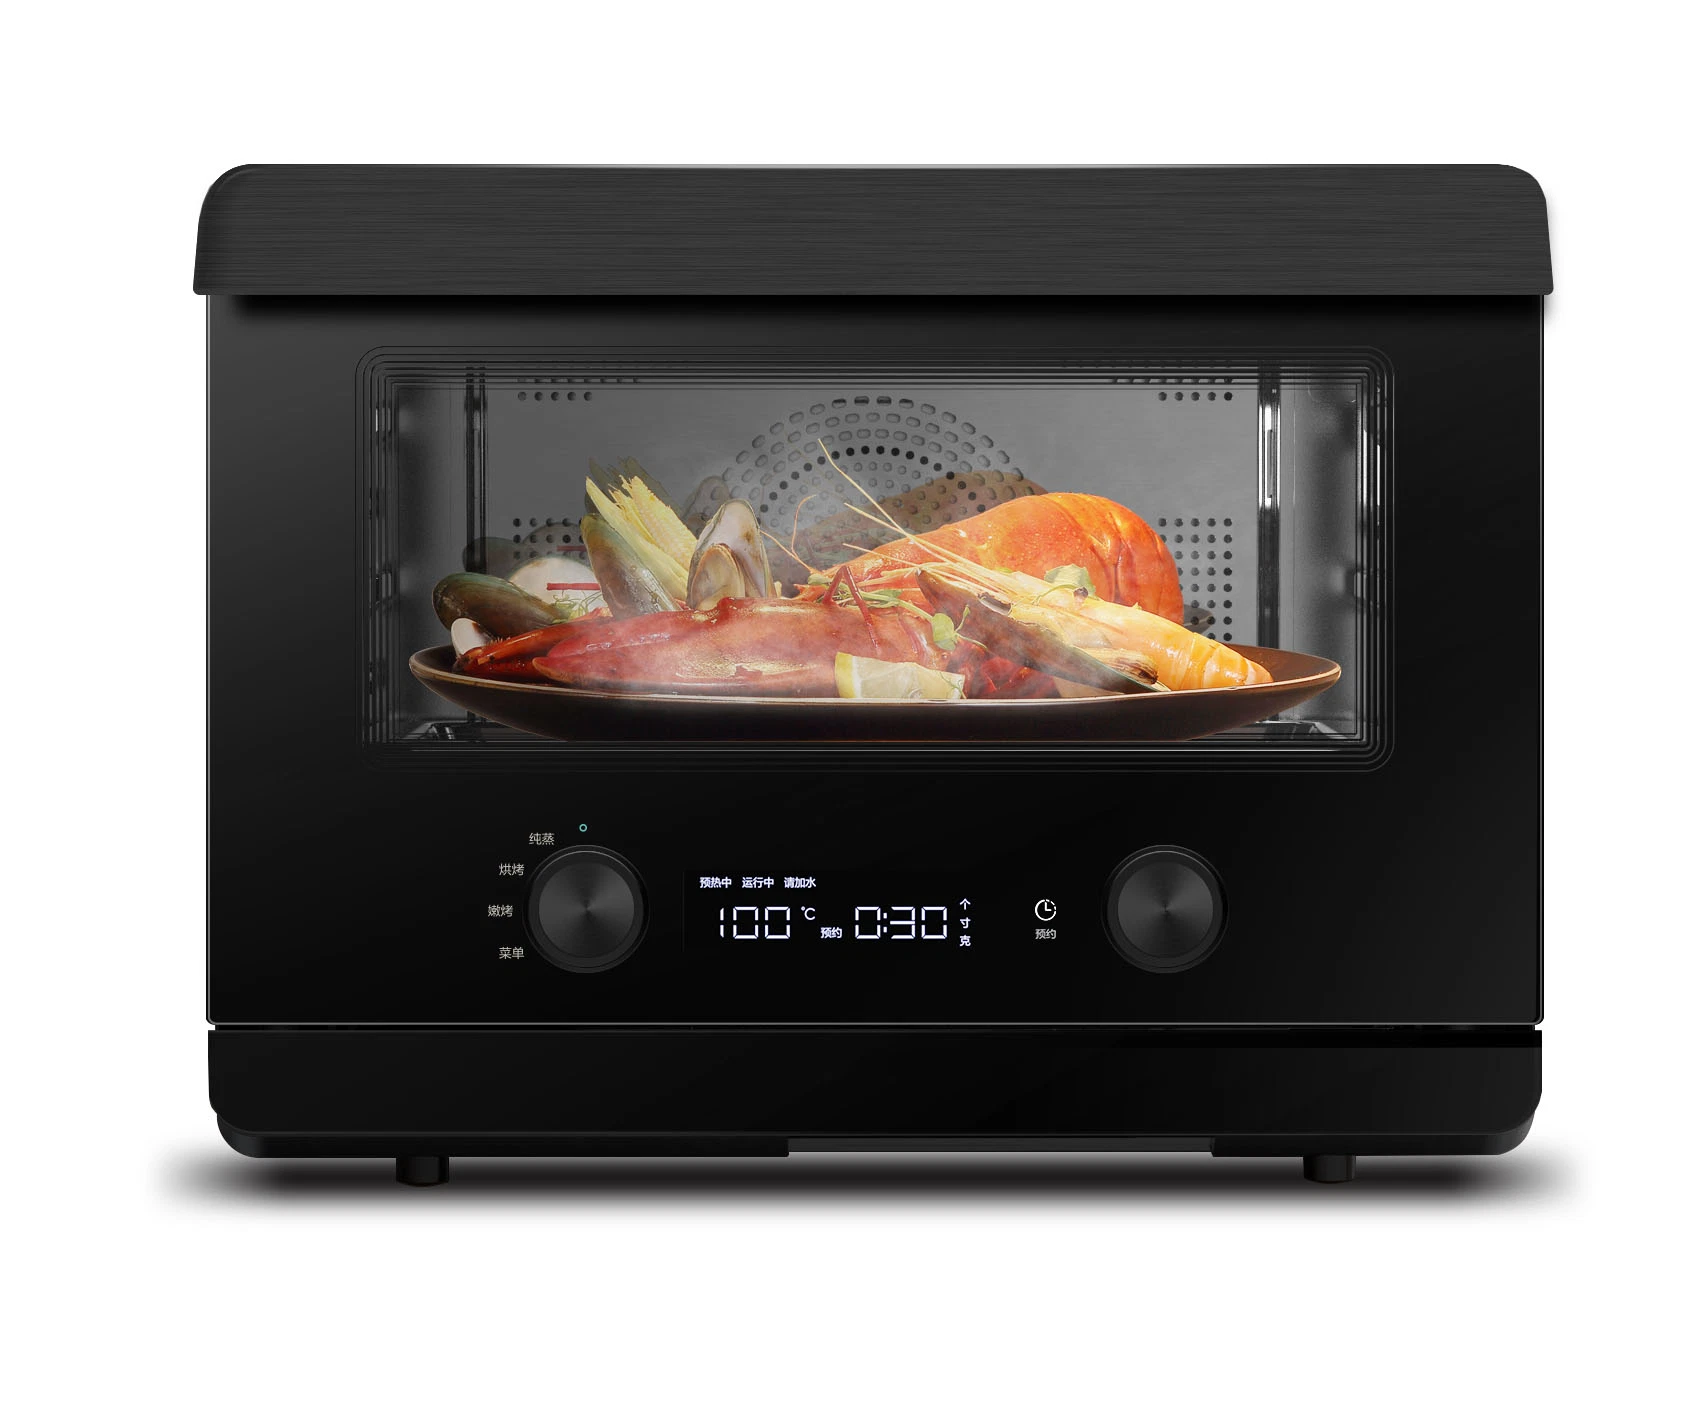 25L Multifunctional Oven with Steam